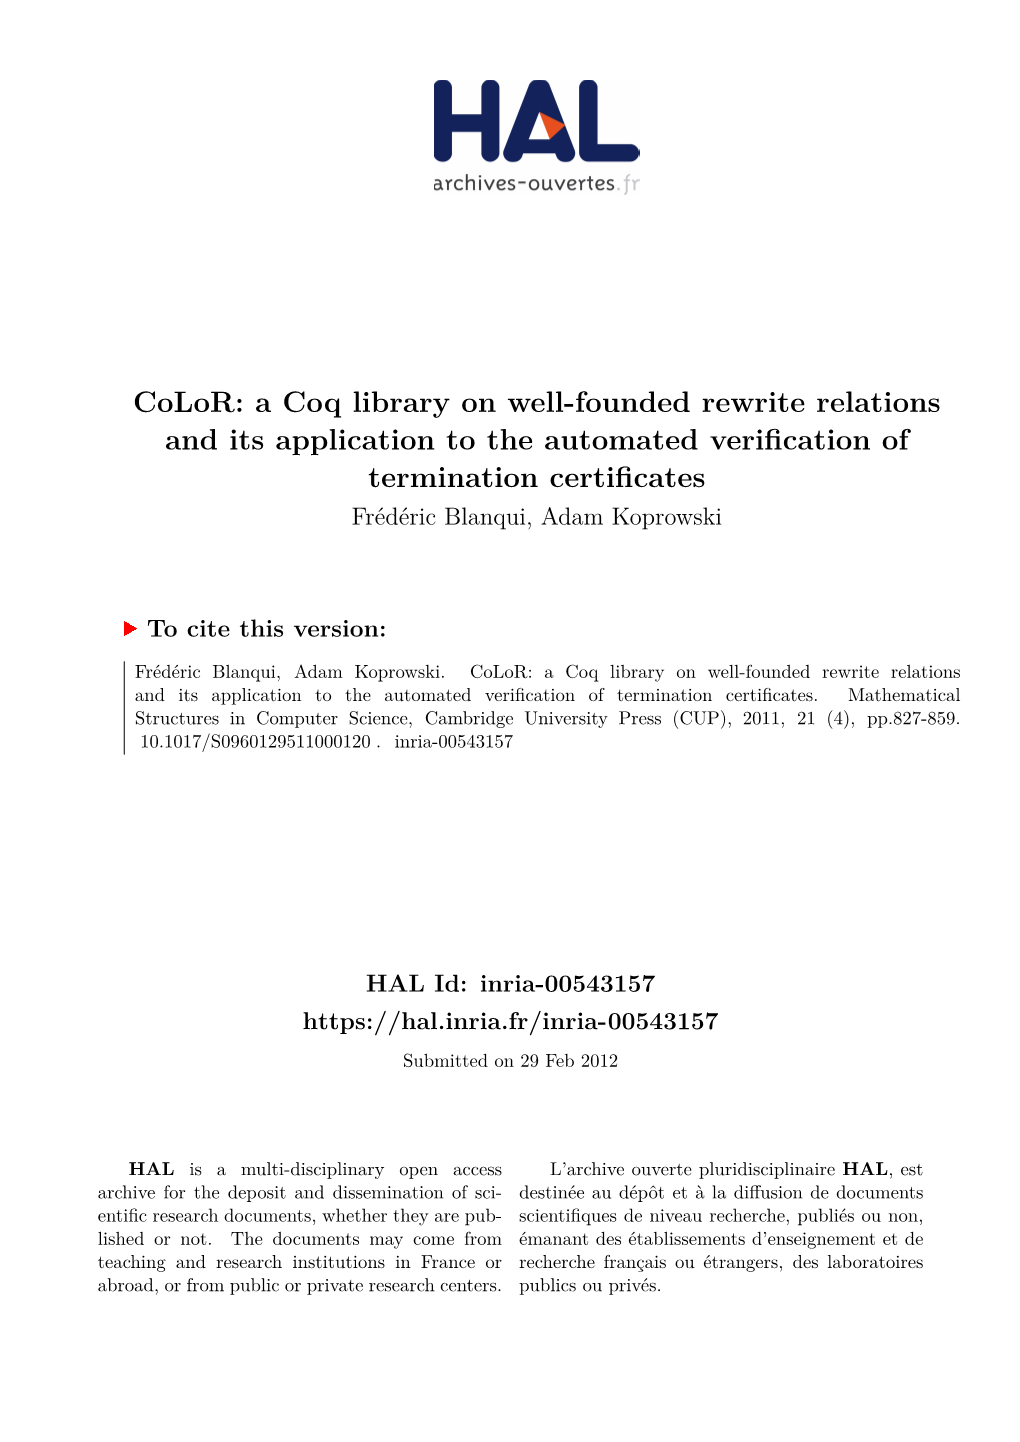 Color: a Coq Library on Well-Founded Rewrite Relations and Its Application to the Automated Verification of Termination Certificates Frédéric Blanqui, Adam Koprowski